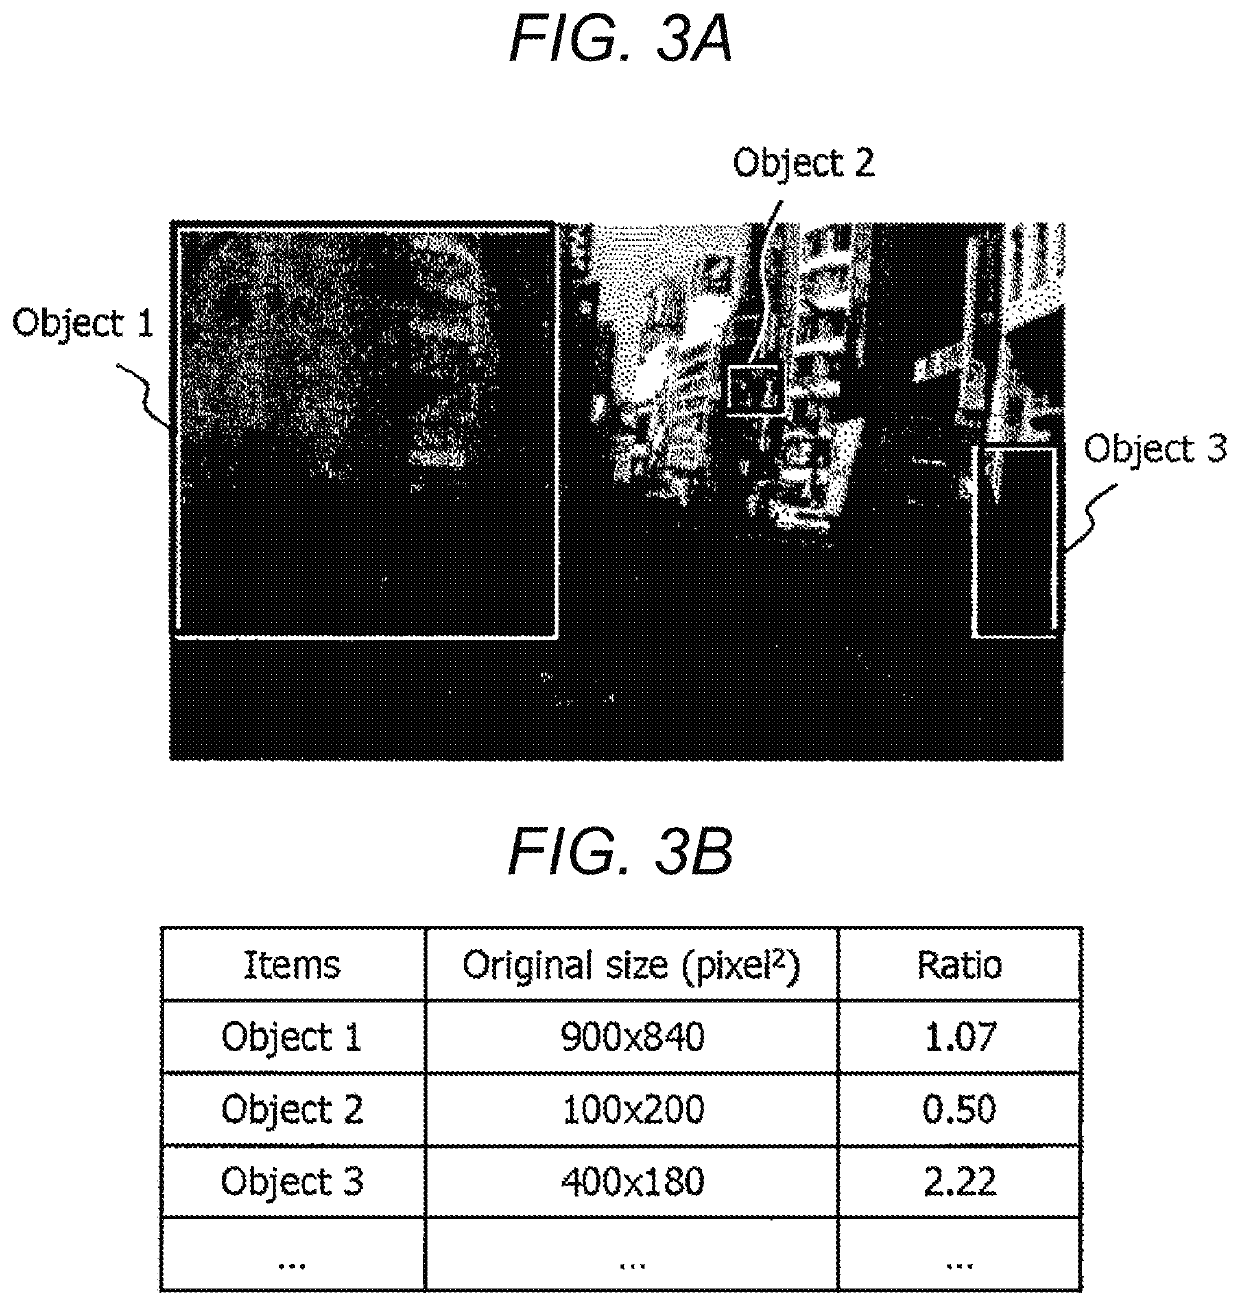 Image recognition system